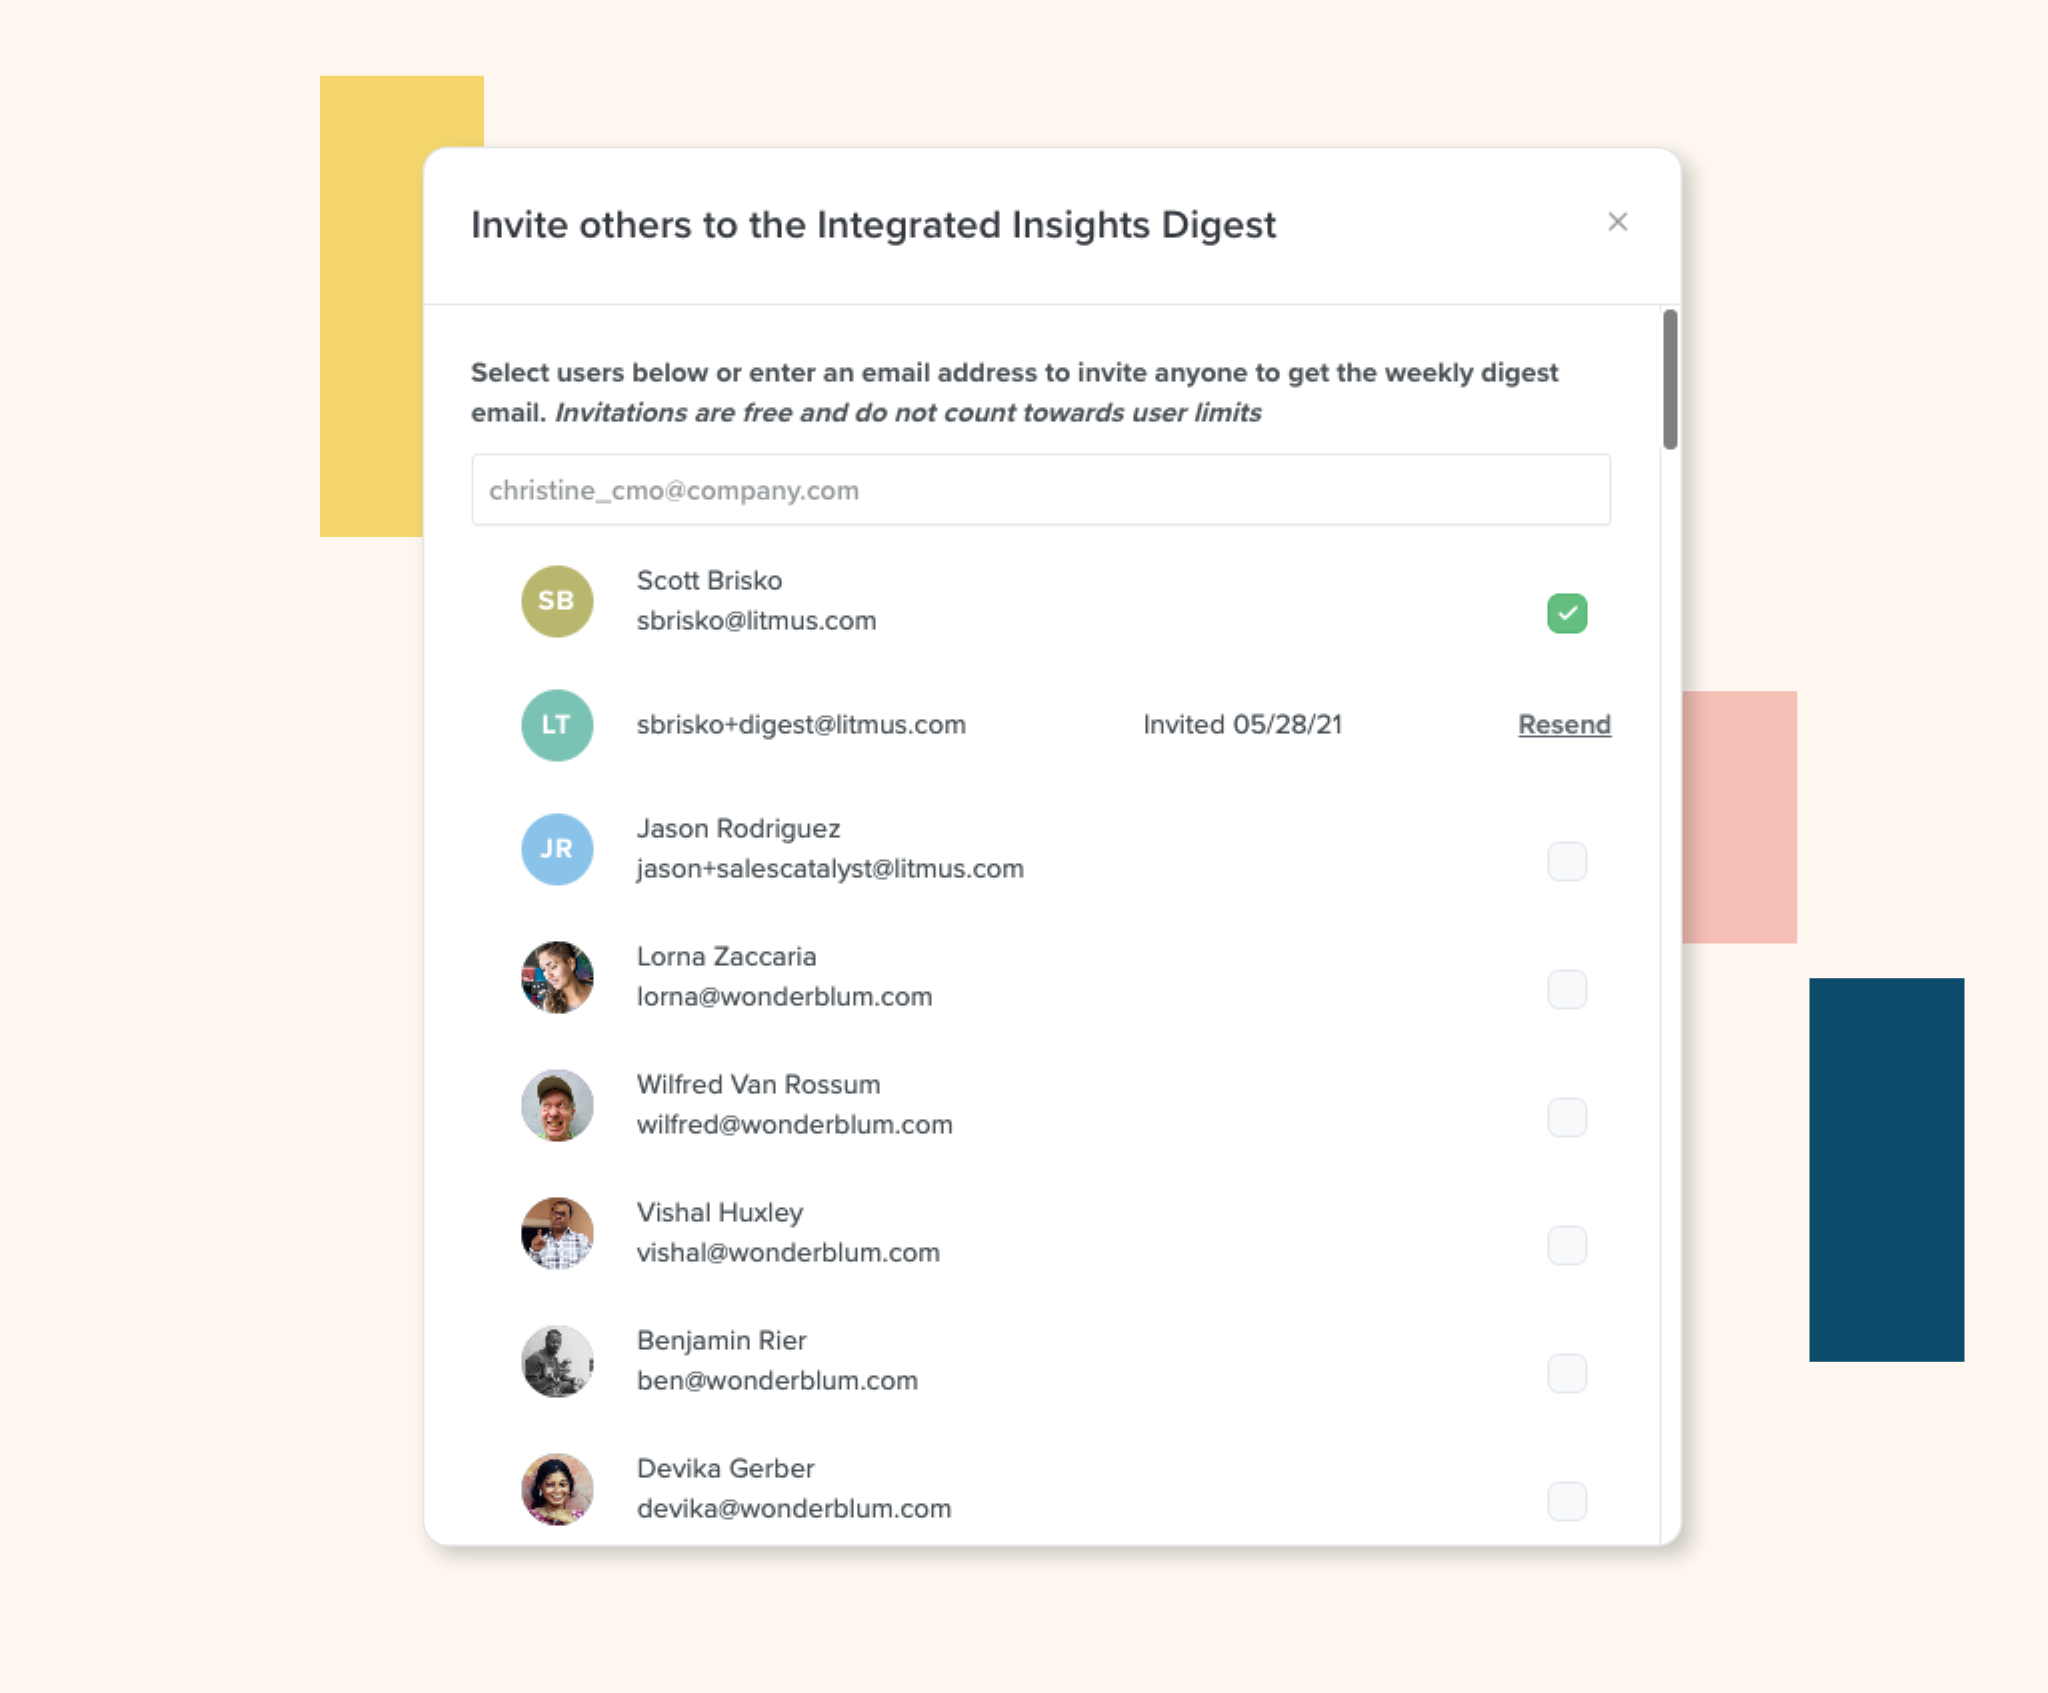 Share insights across your team